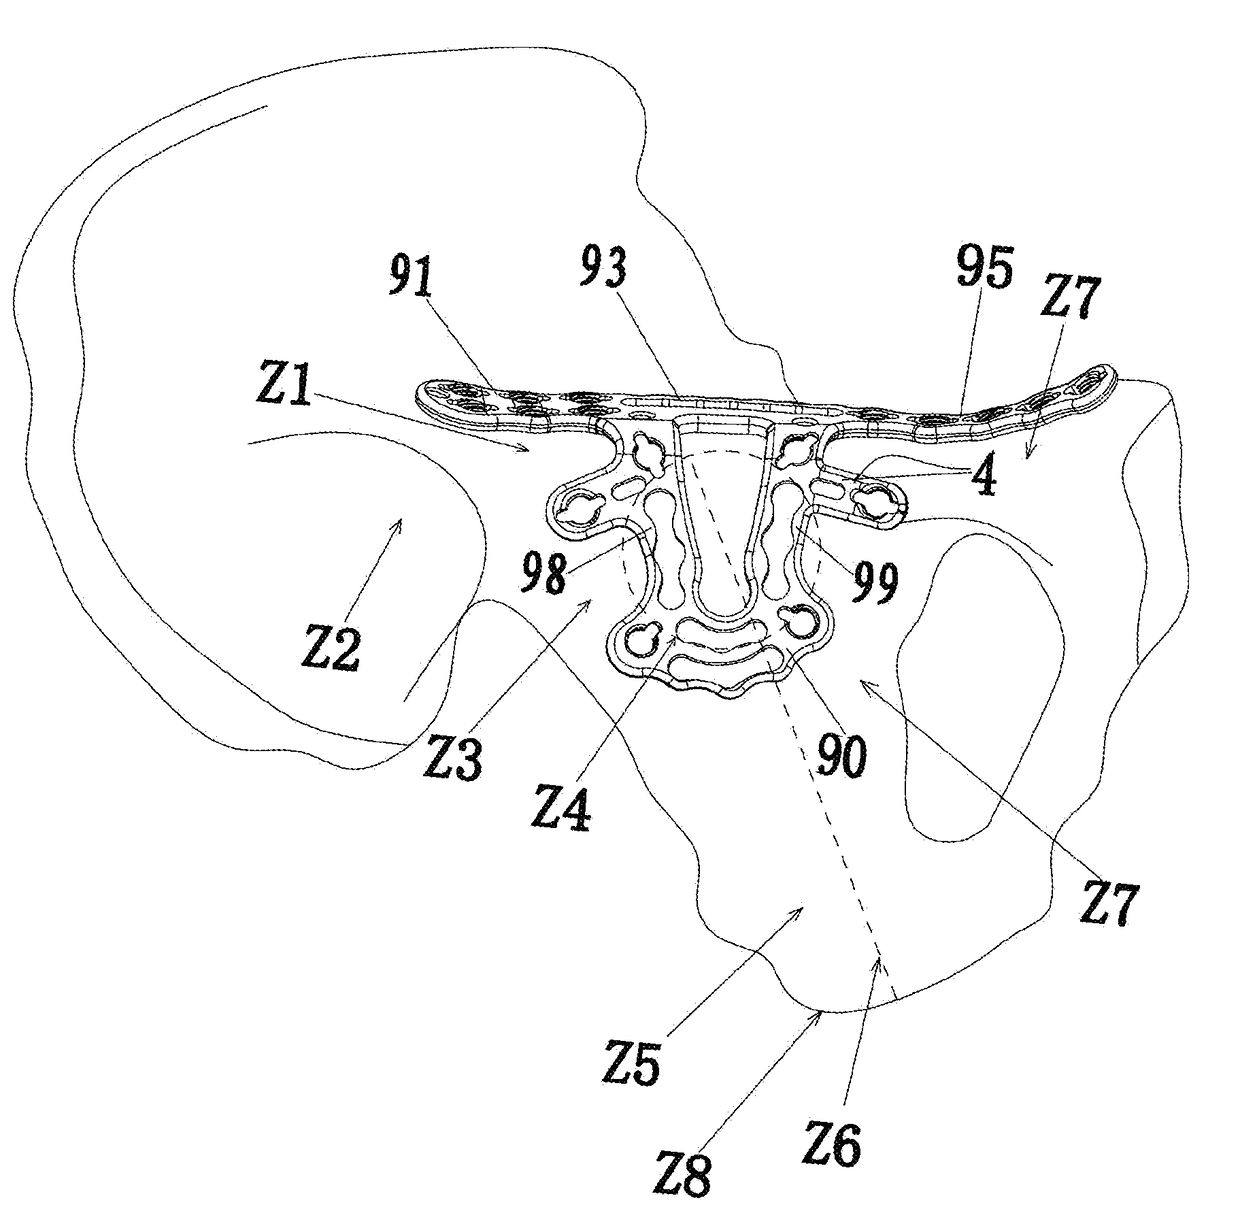 General anatomic self-locking plate for medial acetabulum and auxiliary apparatus thereof